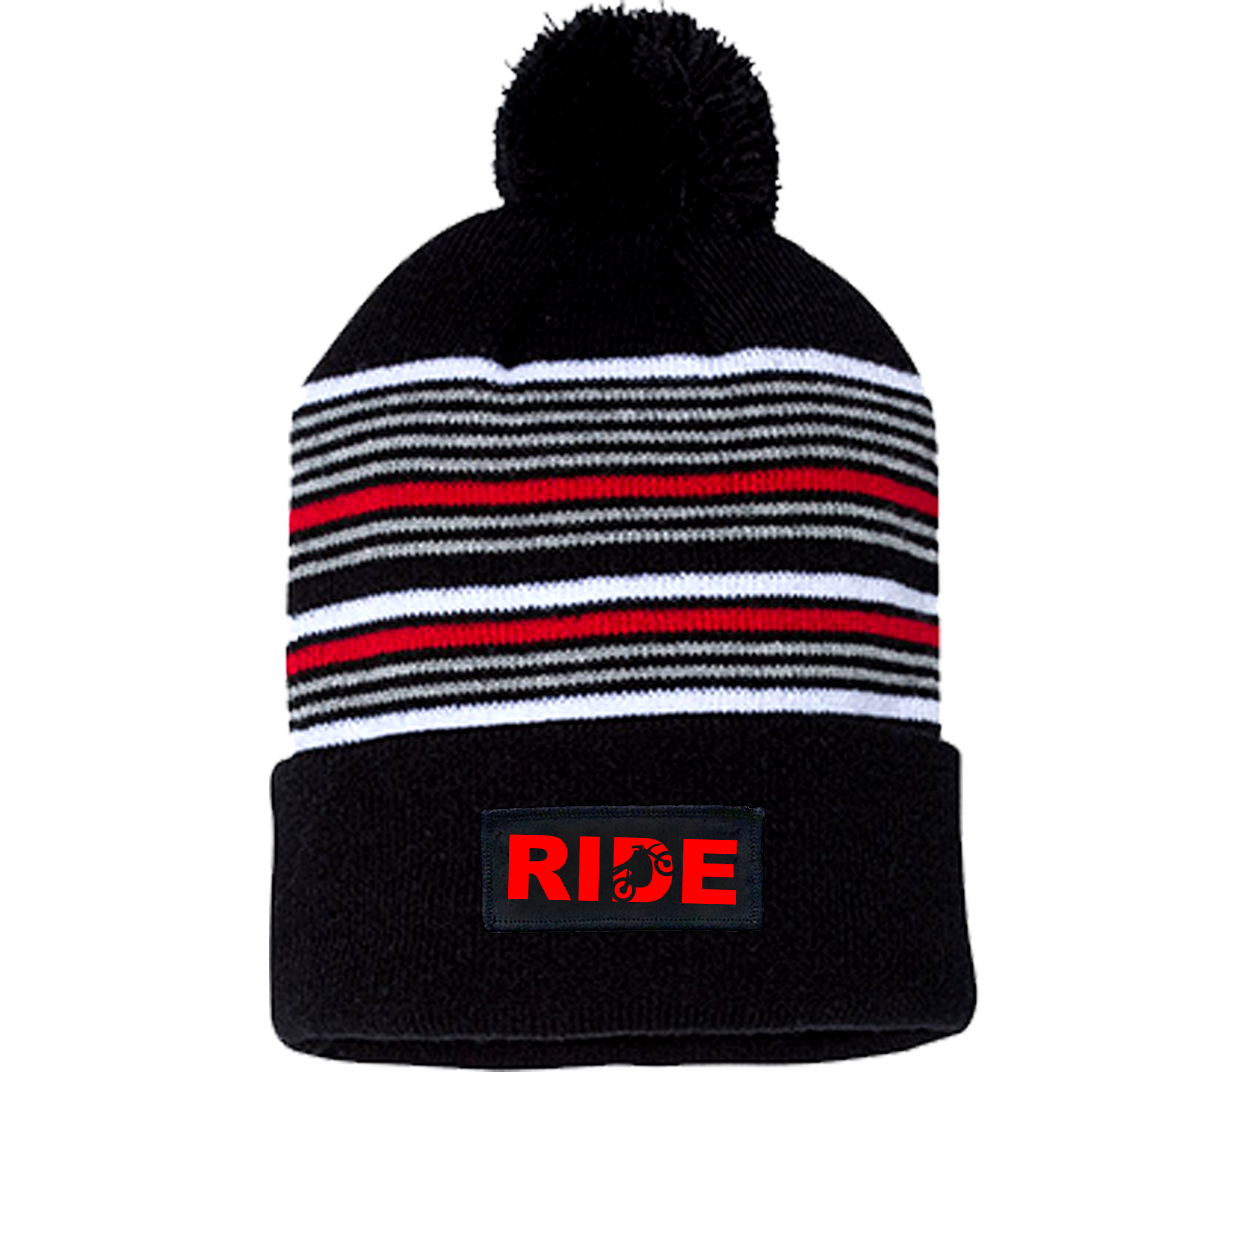 Ride Moto Logo Night Out Woven Patch Roll Up Pom Knit Beanie Black/ White/ Grey/ Red Beanie (Red Logo)